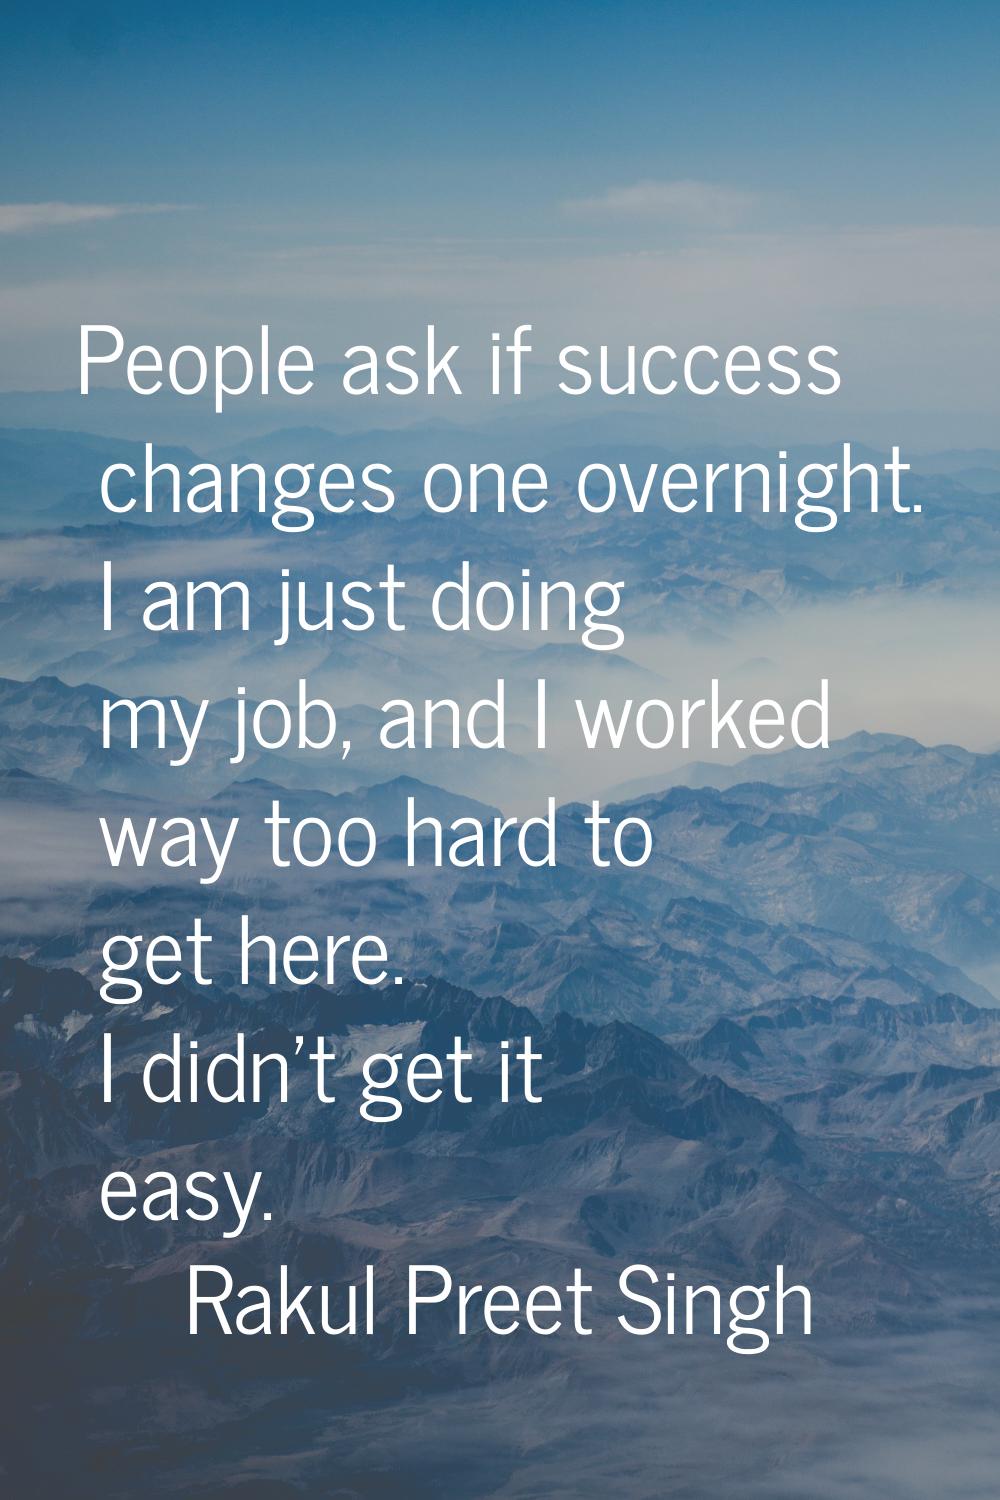 People ask if success changes one overnight. I am just doing my job, and I worked way too hard to g